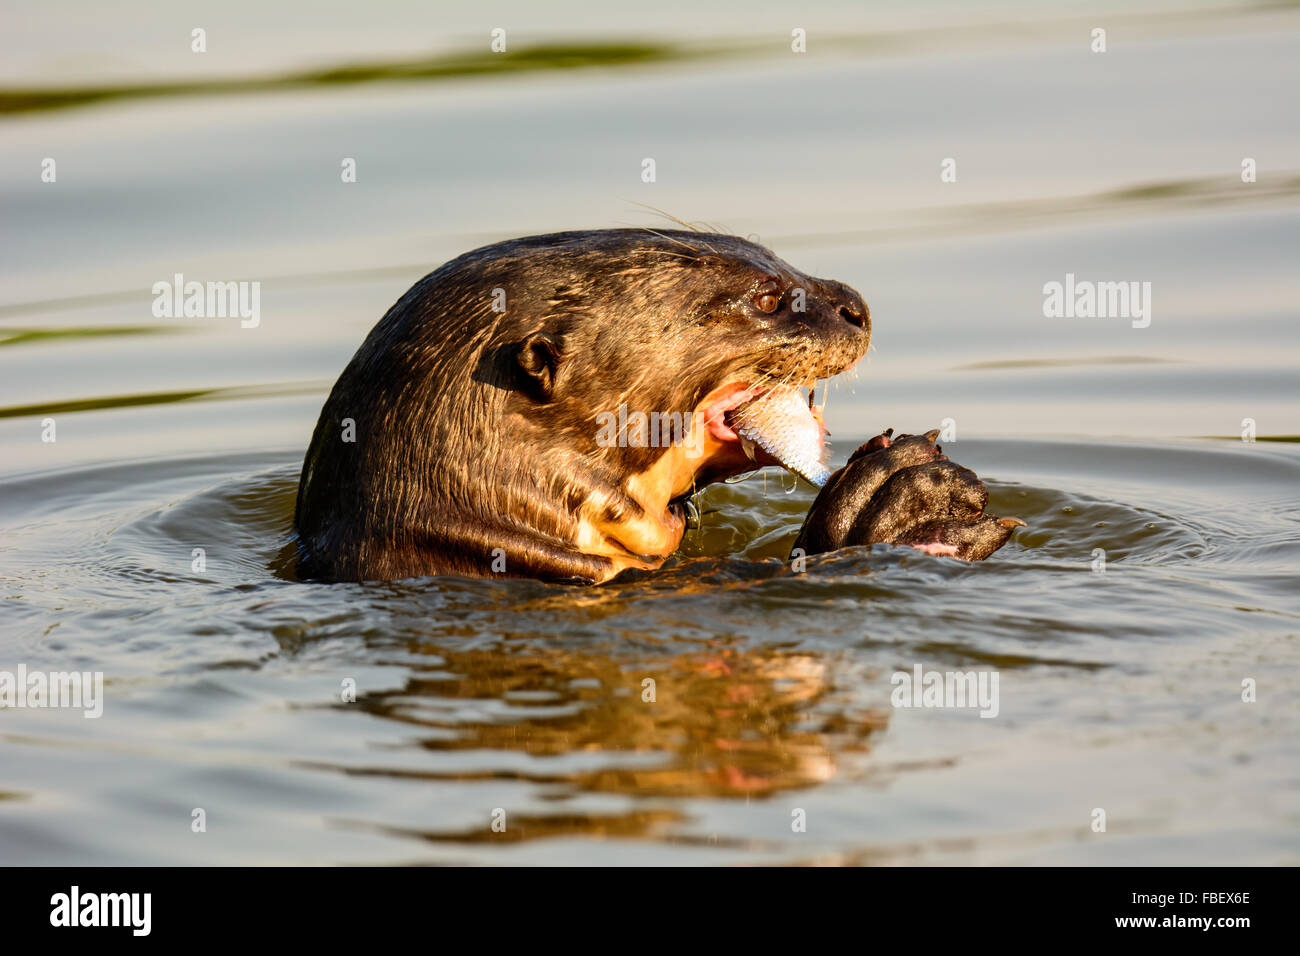 Giant Otter eating a fish lunch Stock Photo